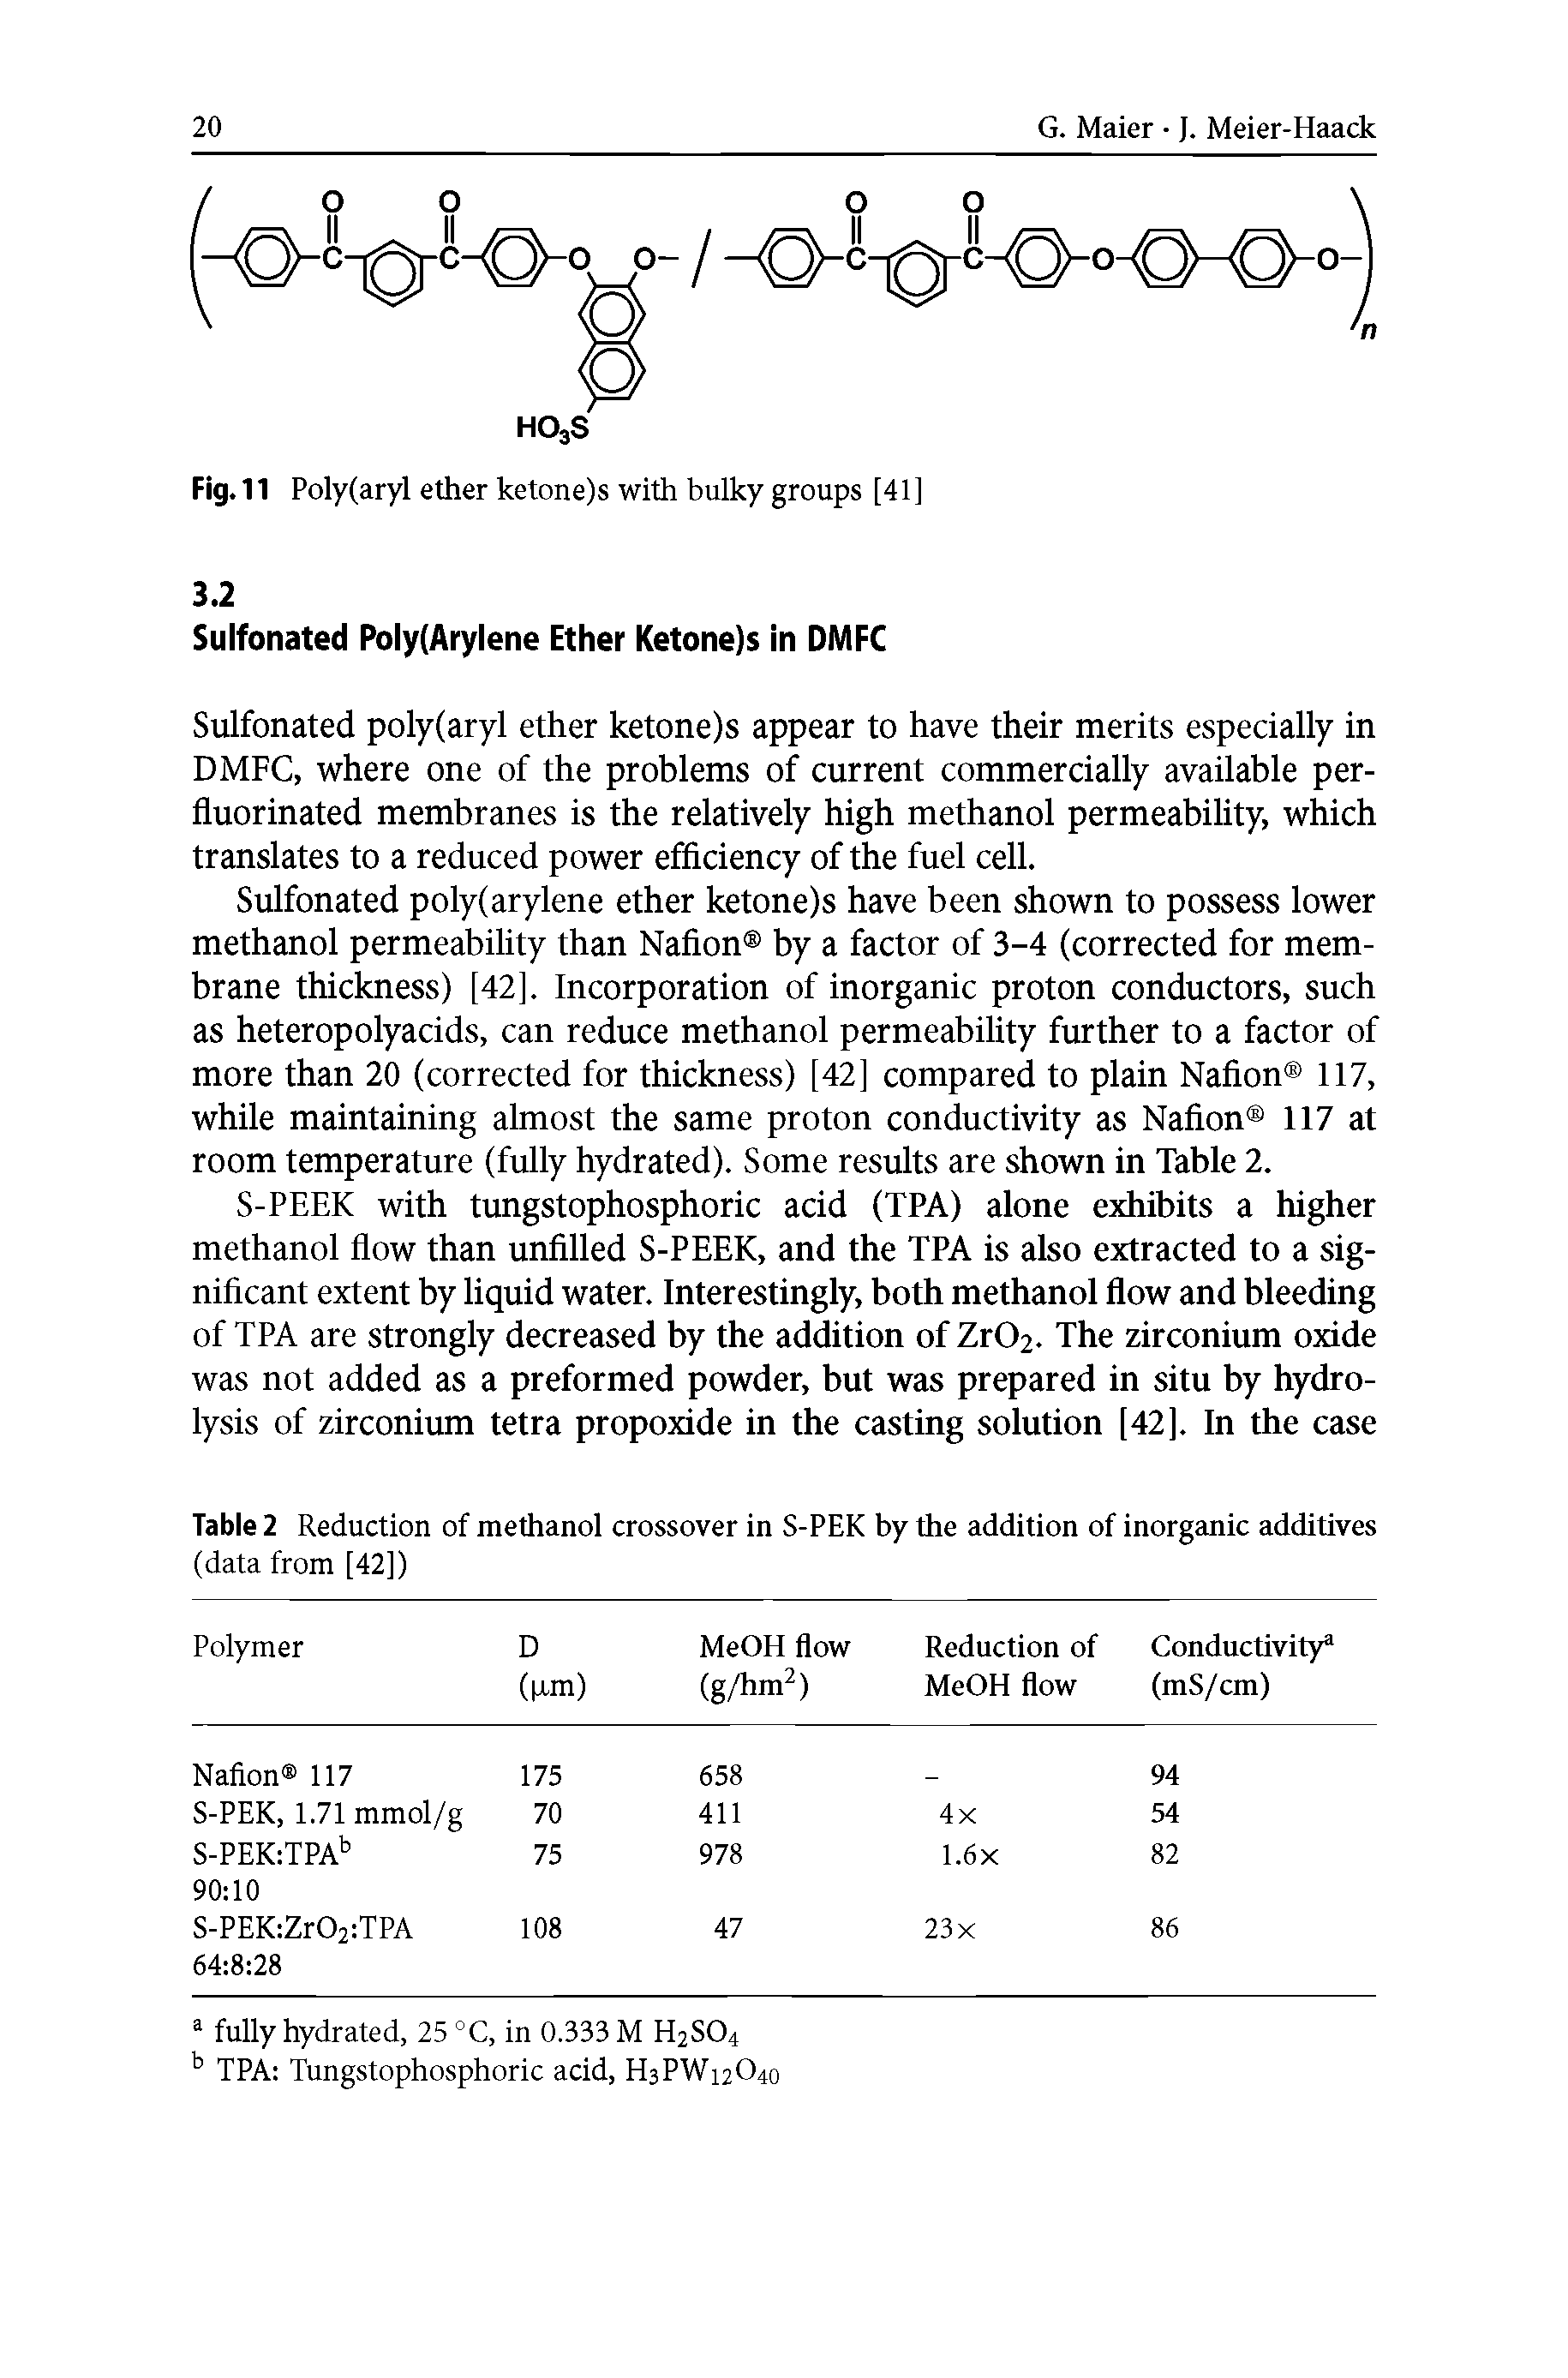 Table 2 Reduction of methanol crossover in S-PEK by the addition of inorganic additives (data from [42])...